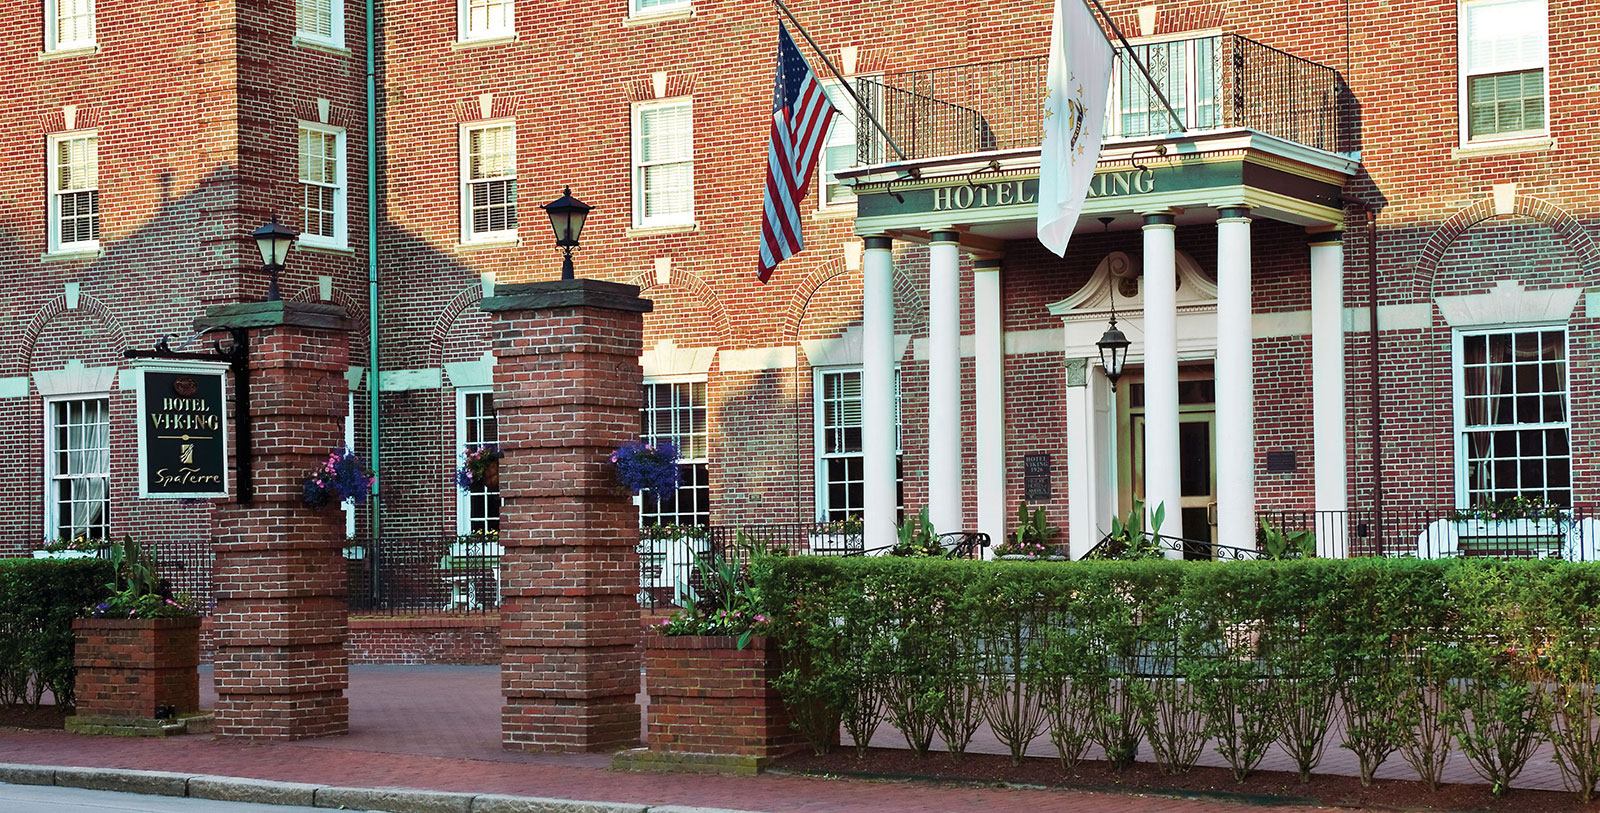 Image of Entrance The Hotel Viking, 1926, Member of Historic Hotels of America, in Newport, Rhode Island, Overview